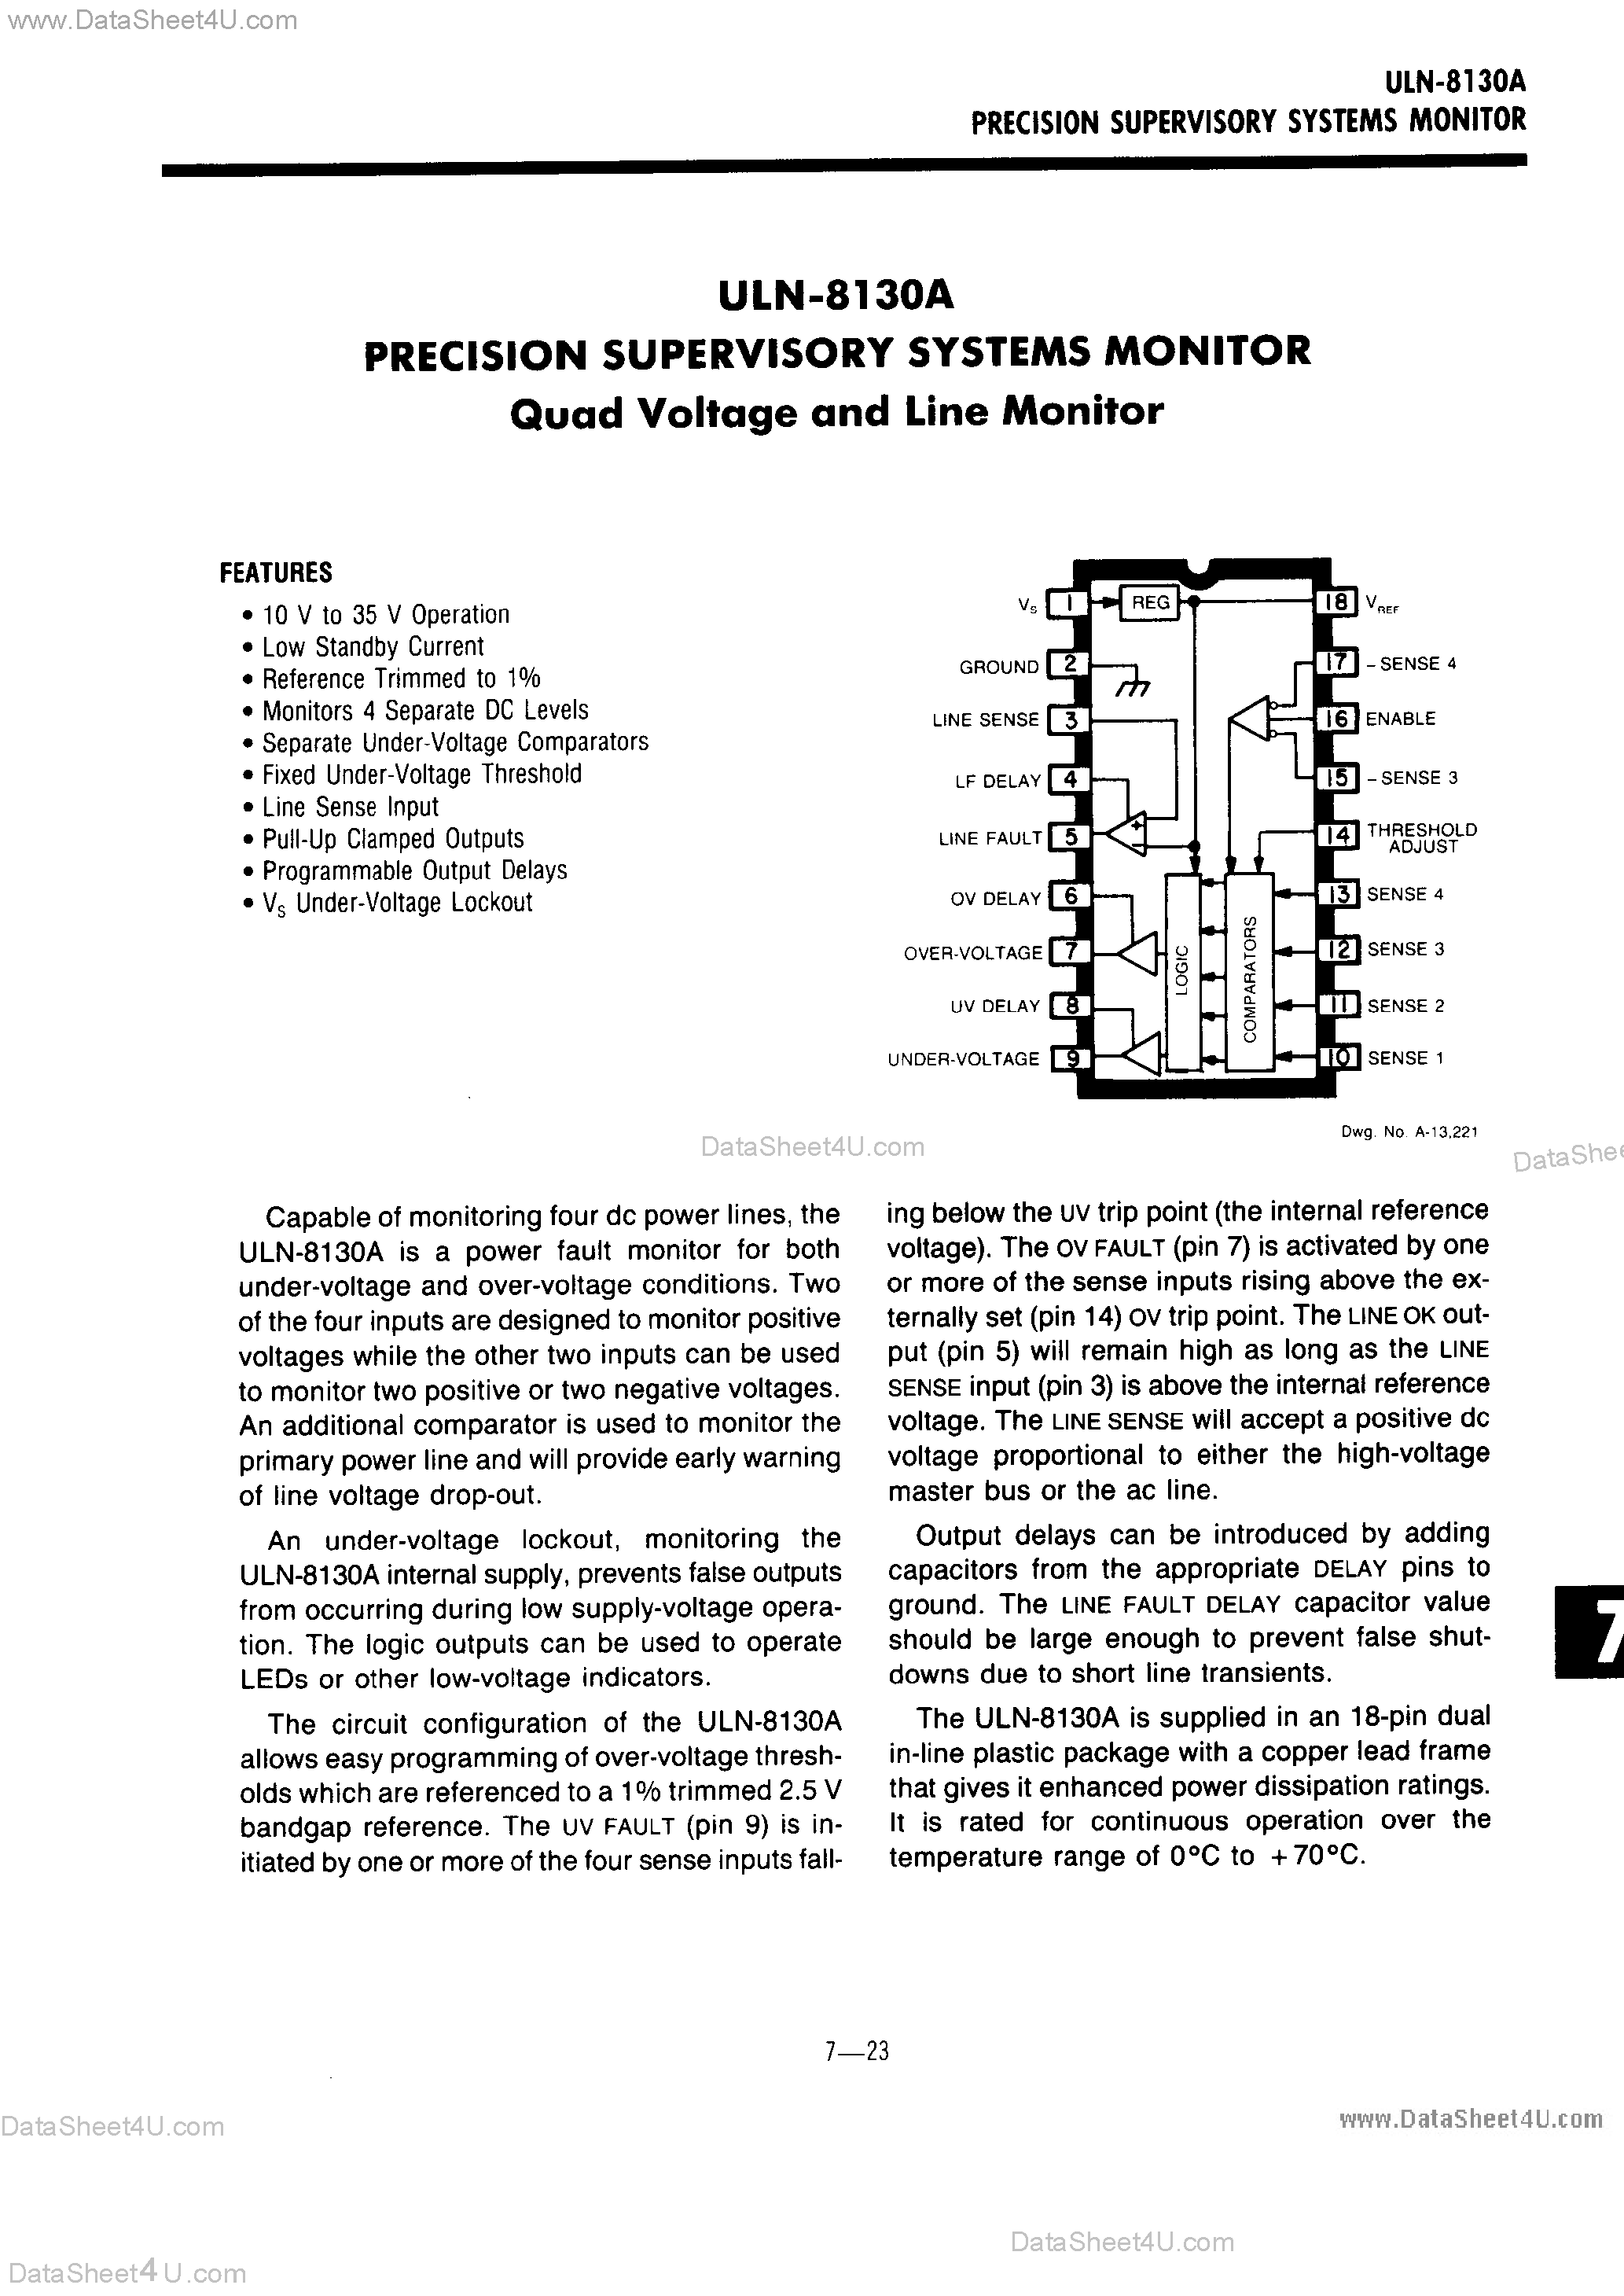 Datasheet ULN-8130A - Precision Supervisory Systems Monitor page 1